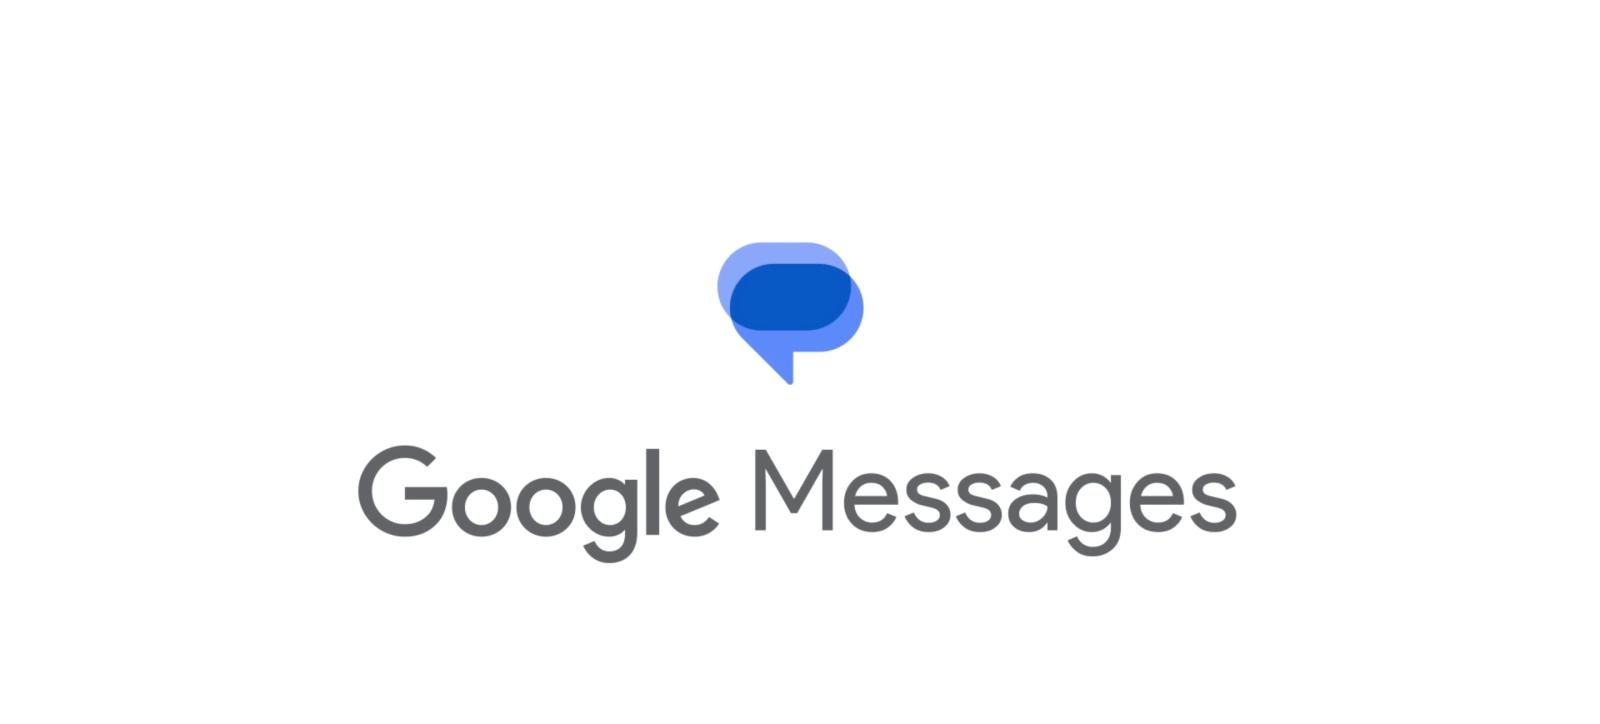 New Features Coming to Google Messages: Gemini Chatbot, Custom Bubbles, and More